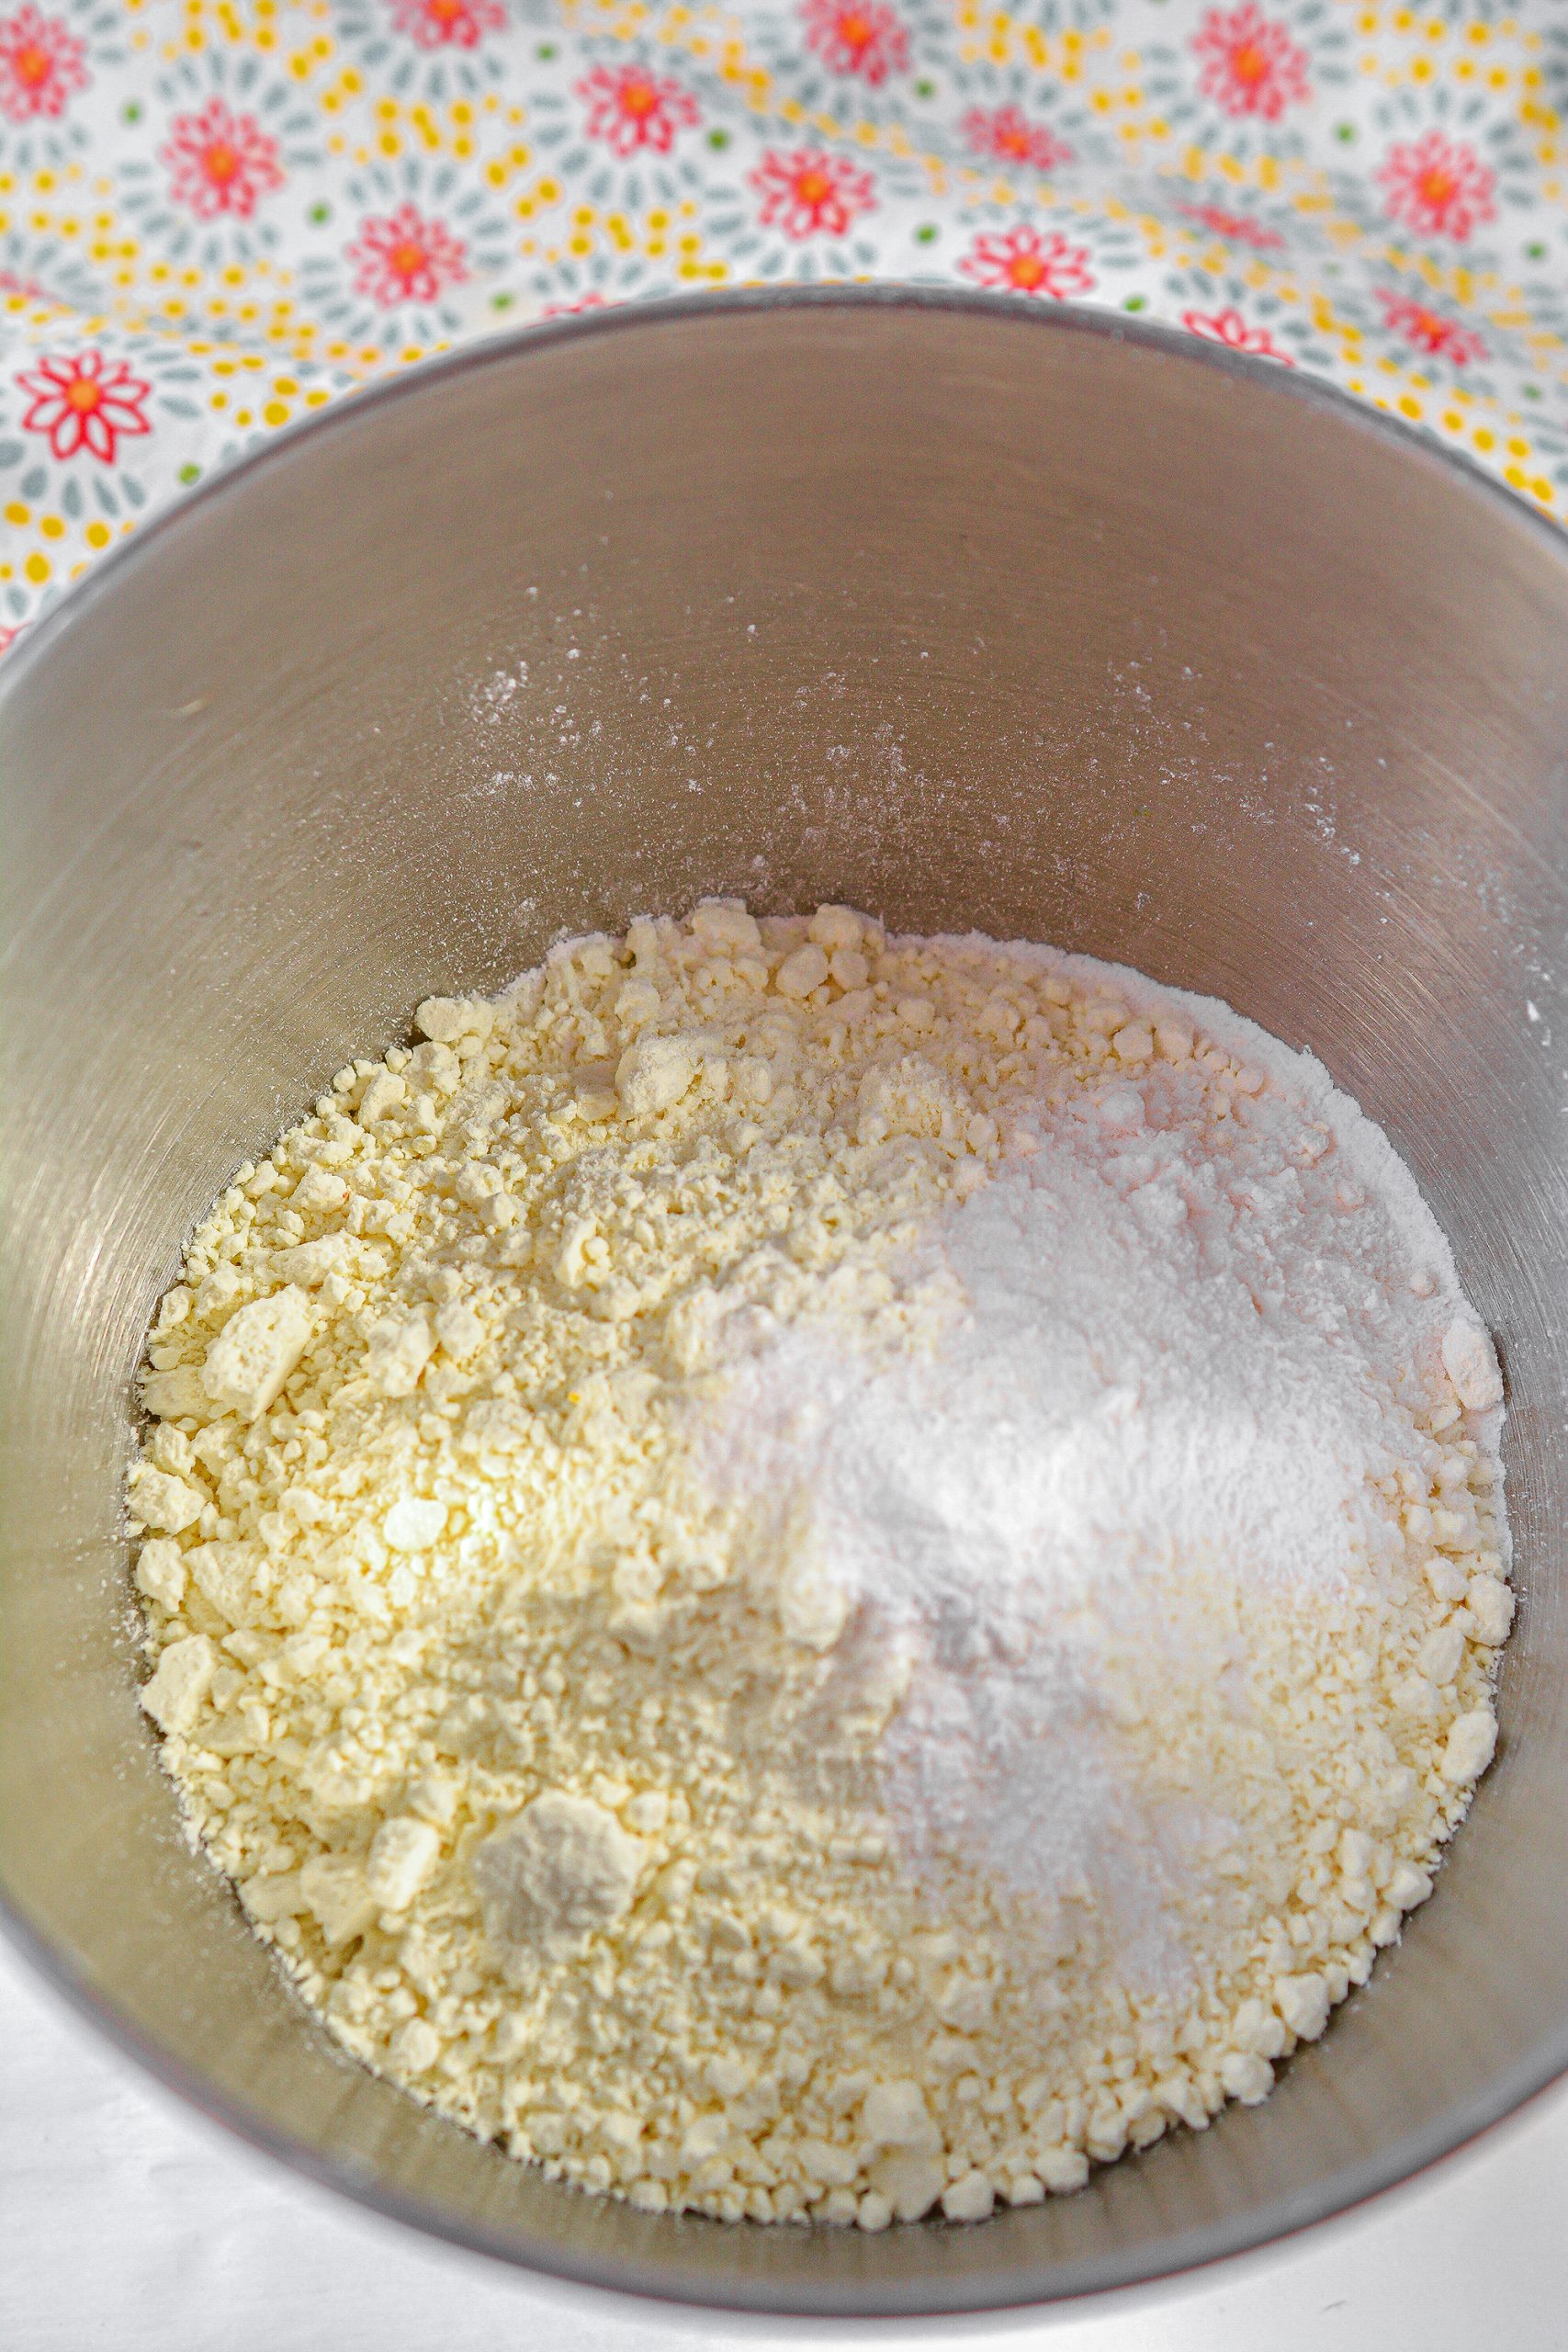 Place the cake mix, pudding mix, and undrained can of crushed pineapple into a mixing bowl beat on high until well combined.